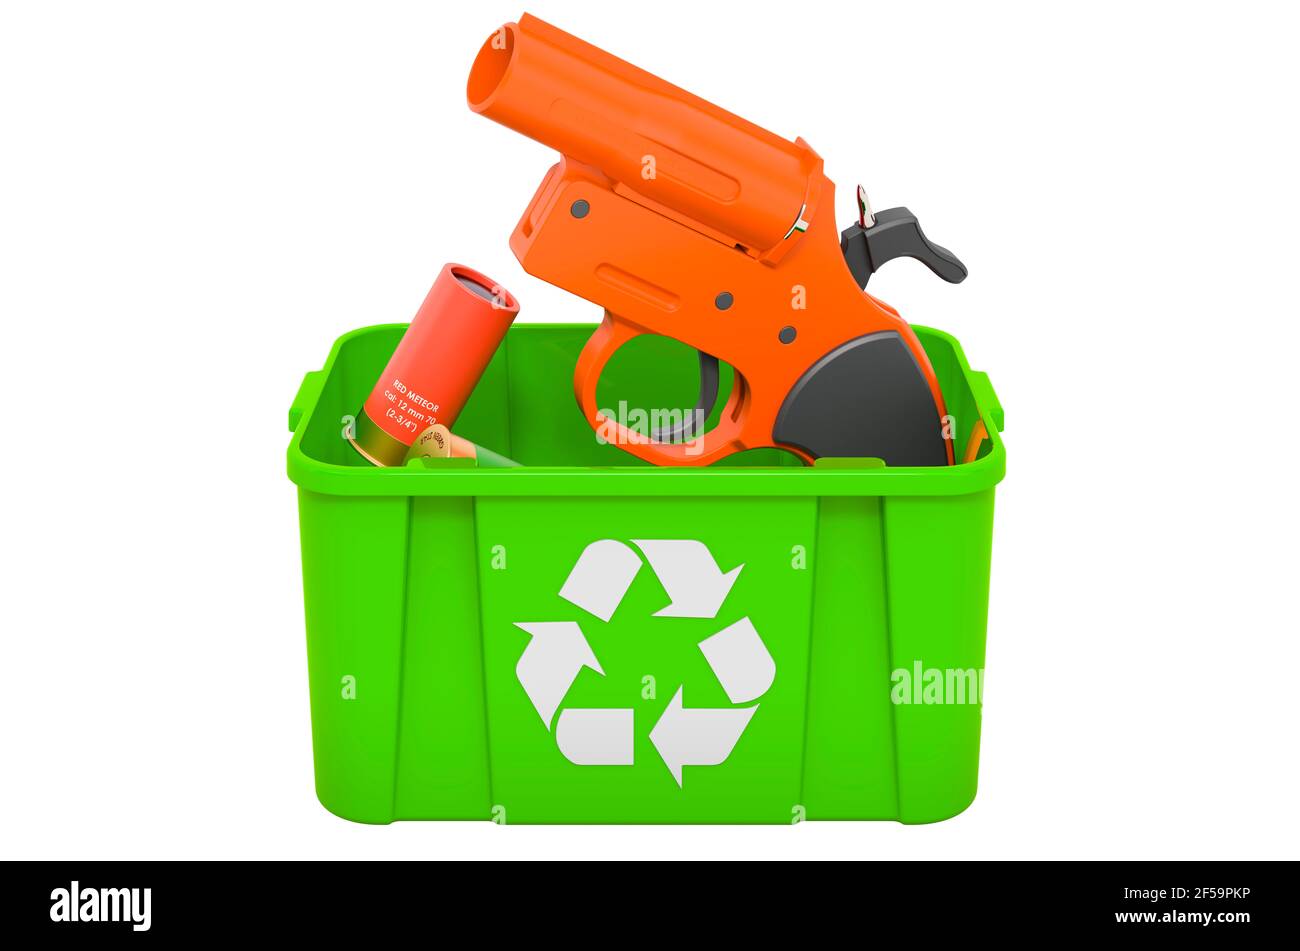 Recycling trashcan with signal flare launcher, 3D rendering isolated on white background Stock Photo